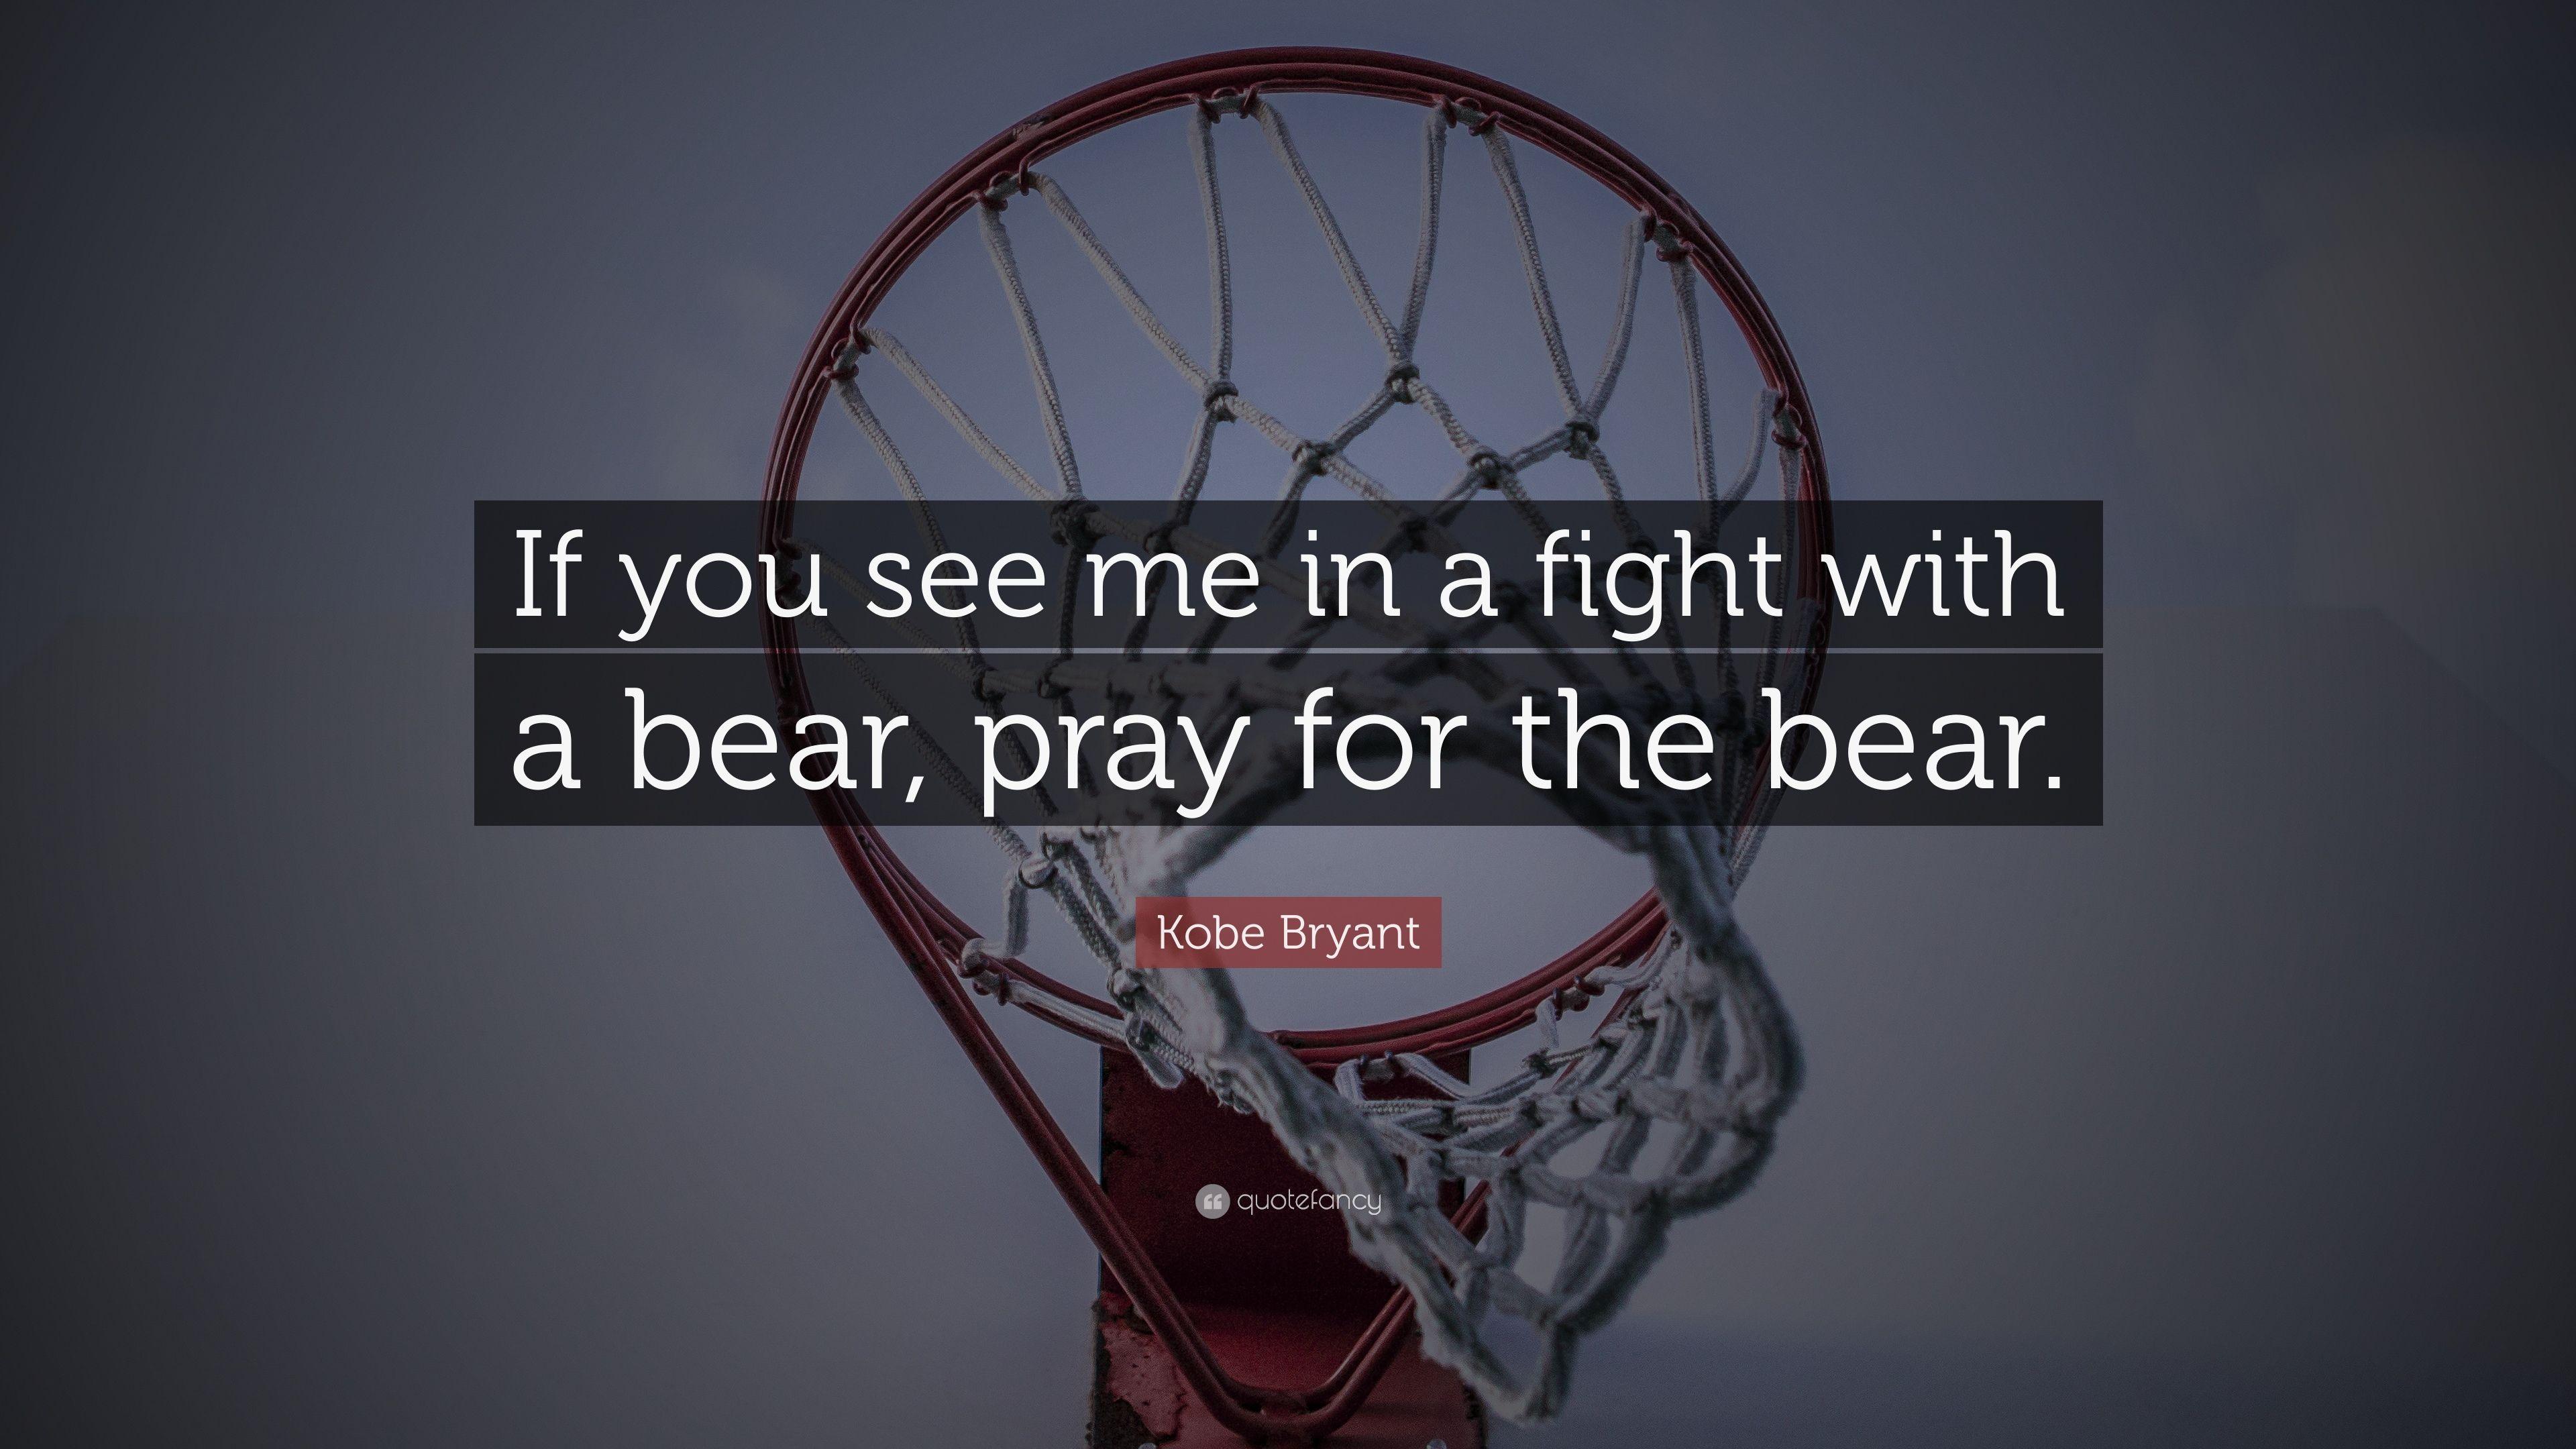 Kobe Bryant Quote: “If you see me in a fight with a bear, pray